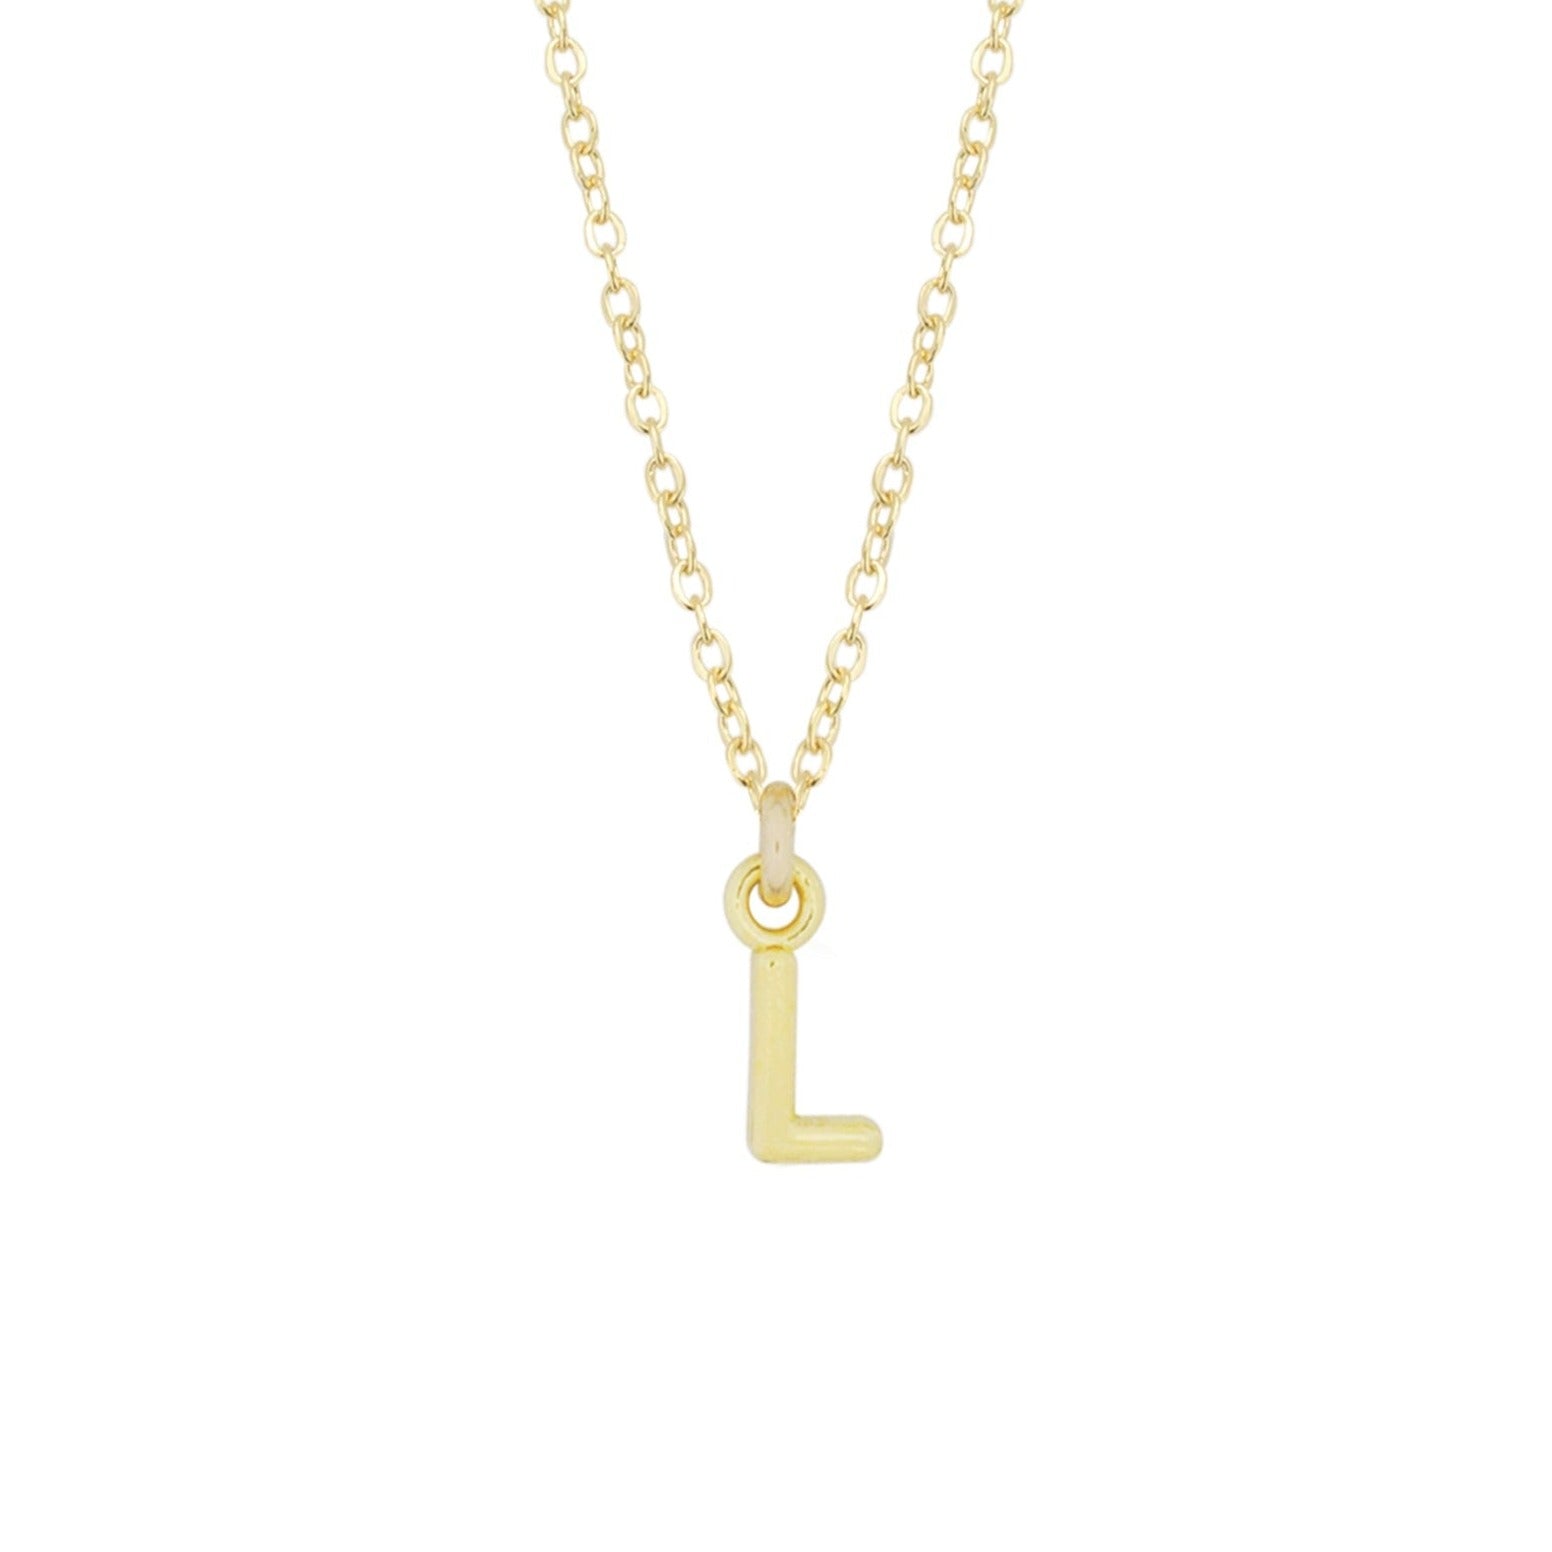 L Gold Initial Necklace by Katie Dean Jewelry, made in America, perfect for the dainty minimal jewelry lovers